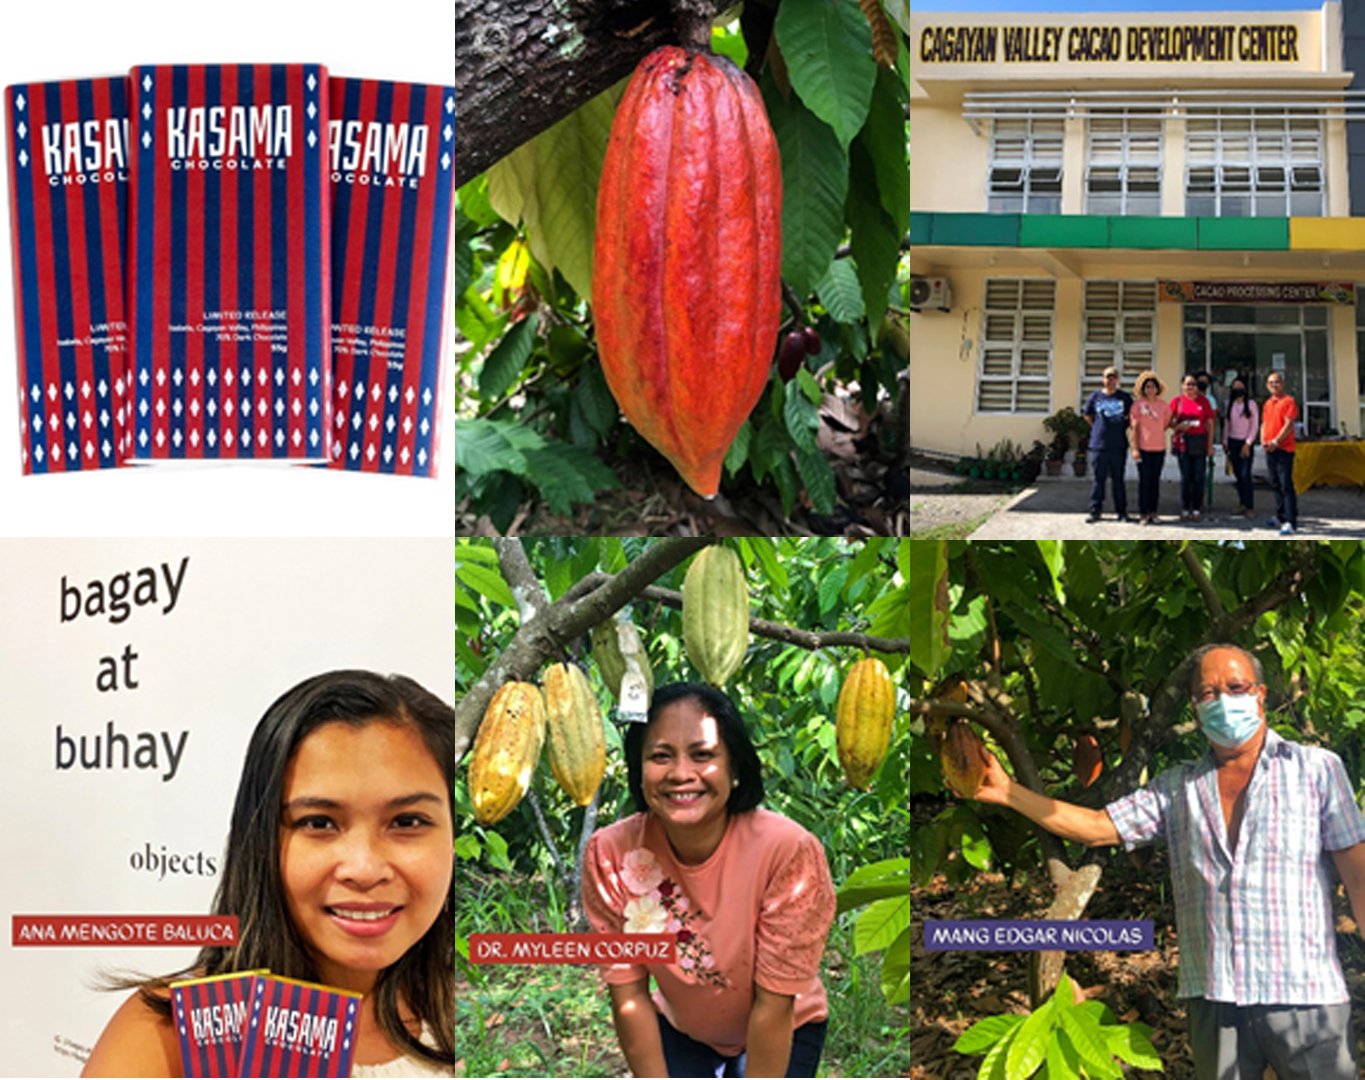 (L-R) First row: Kasama Chocolate promotional material; cacao fruit; Cagayan Valley Cacao Development Center.  Second row: Photos of makers of Kasama Chocolate